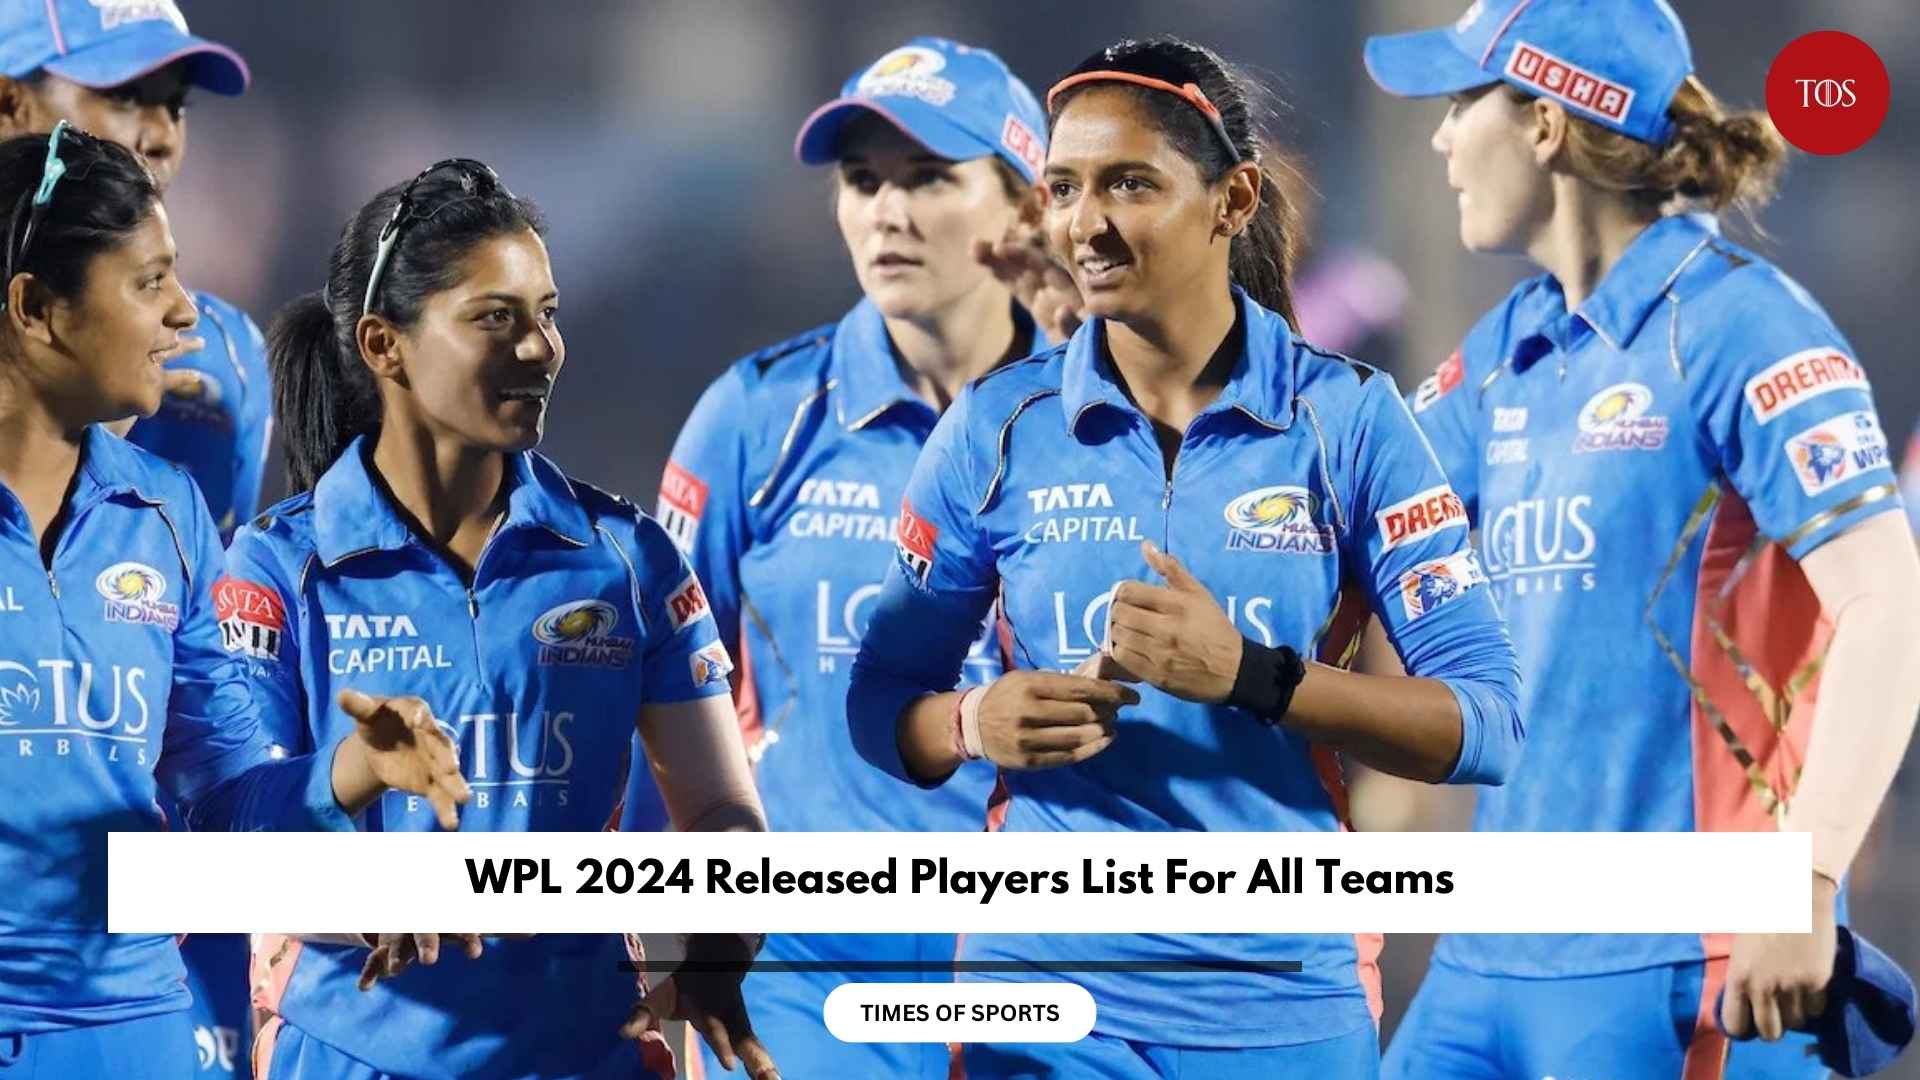 WPL 2024 Released Players List For All Teams